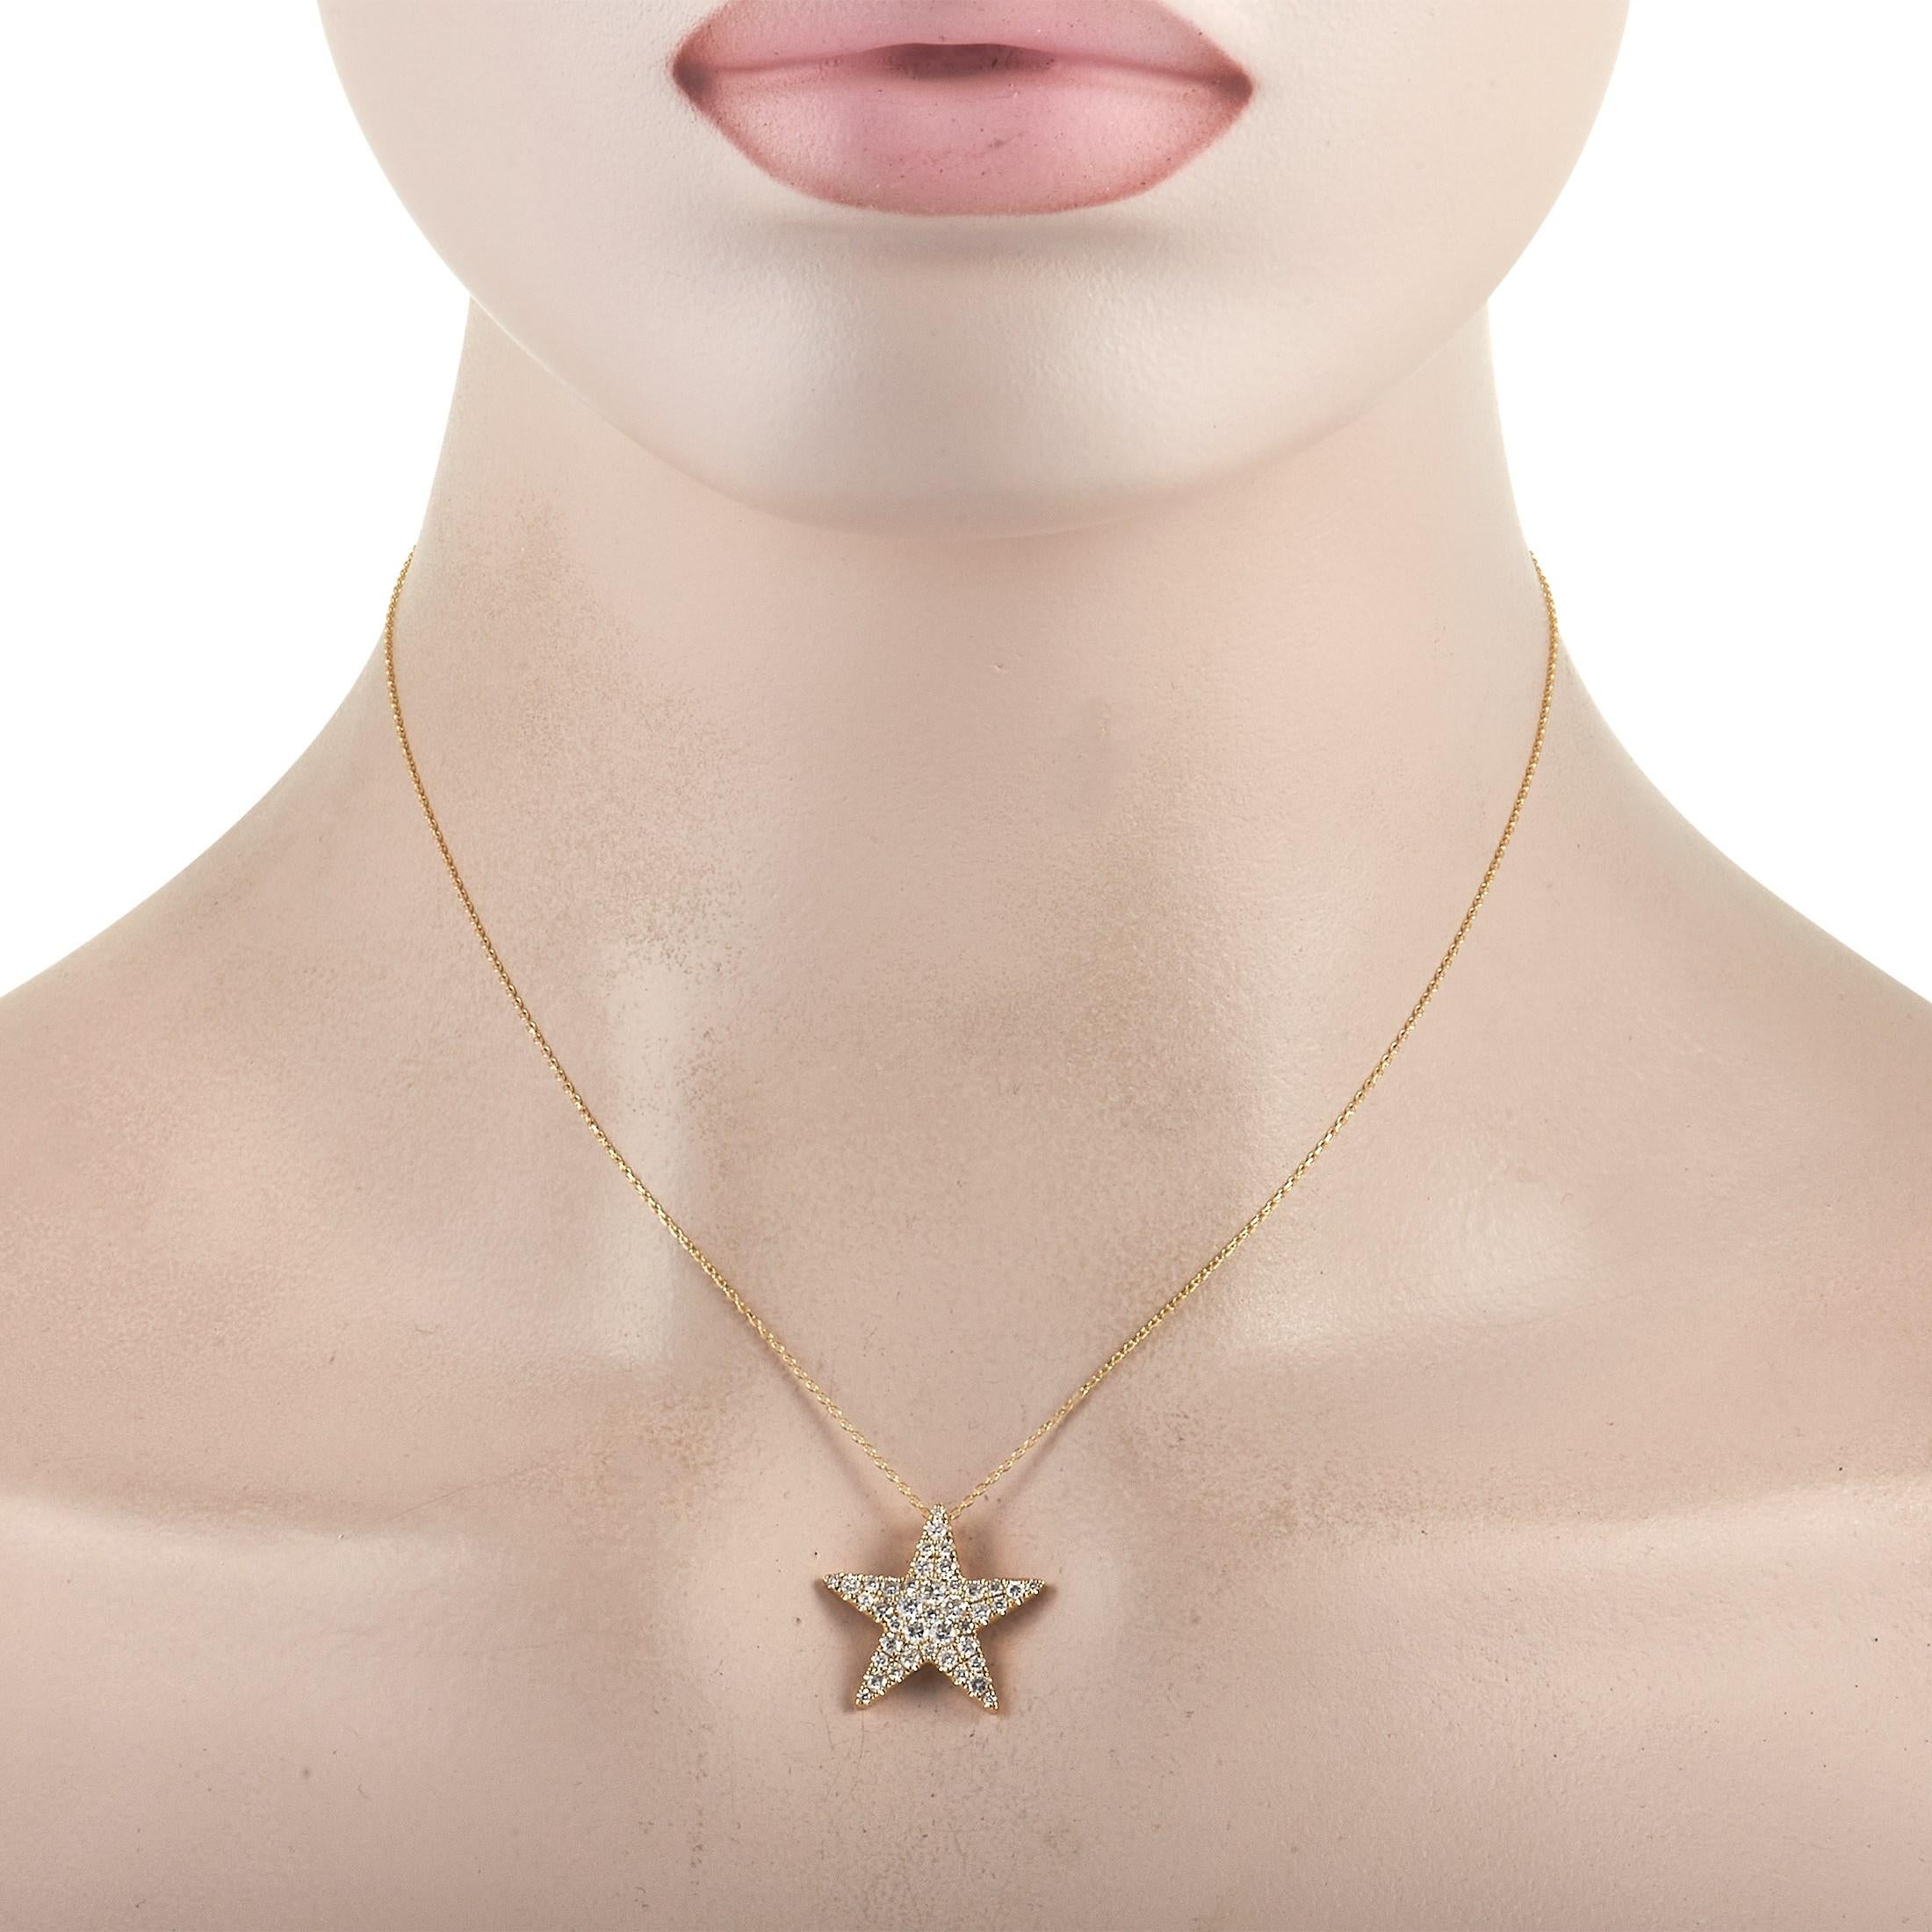 Shine bright like a star, and a diamond, with this playful piece of fine jewelry. The LB Exclusive 18K Yellow Gold 1.00 ct Diamond Star Necklace features a 16-inch yellow gold necklace chain holding a star-shaped pendant embellished at the front